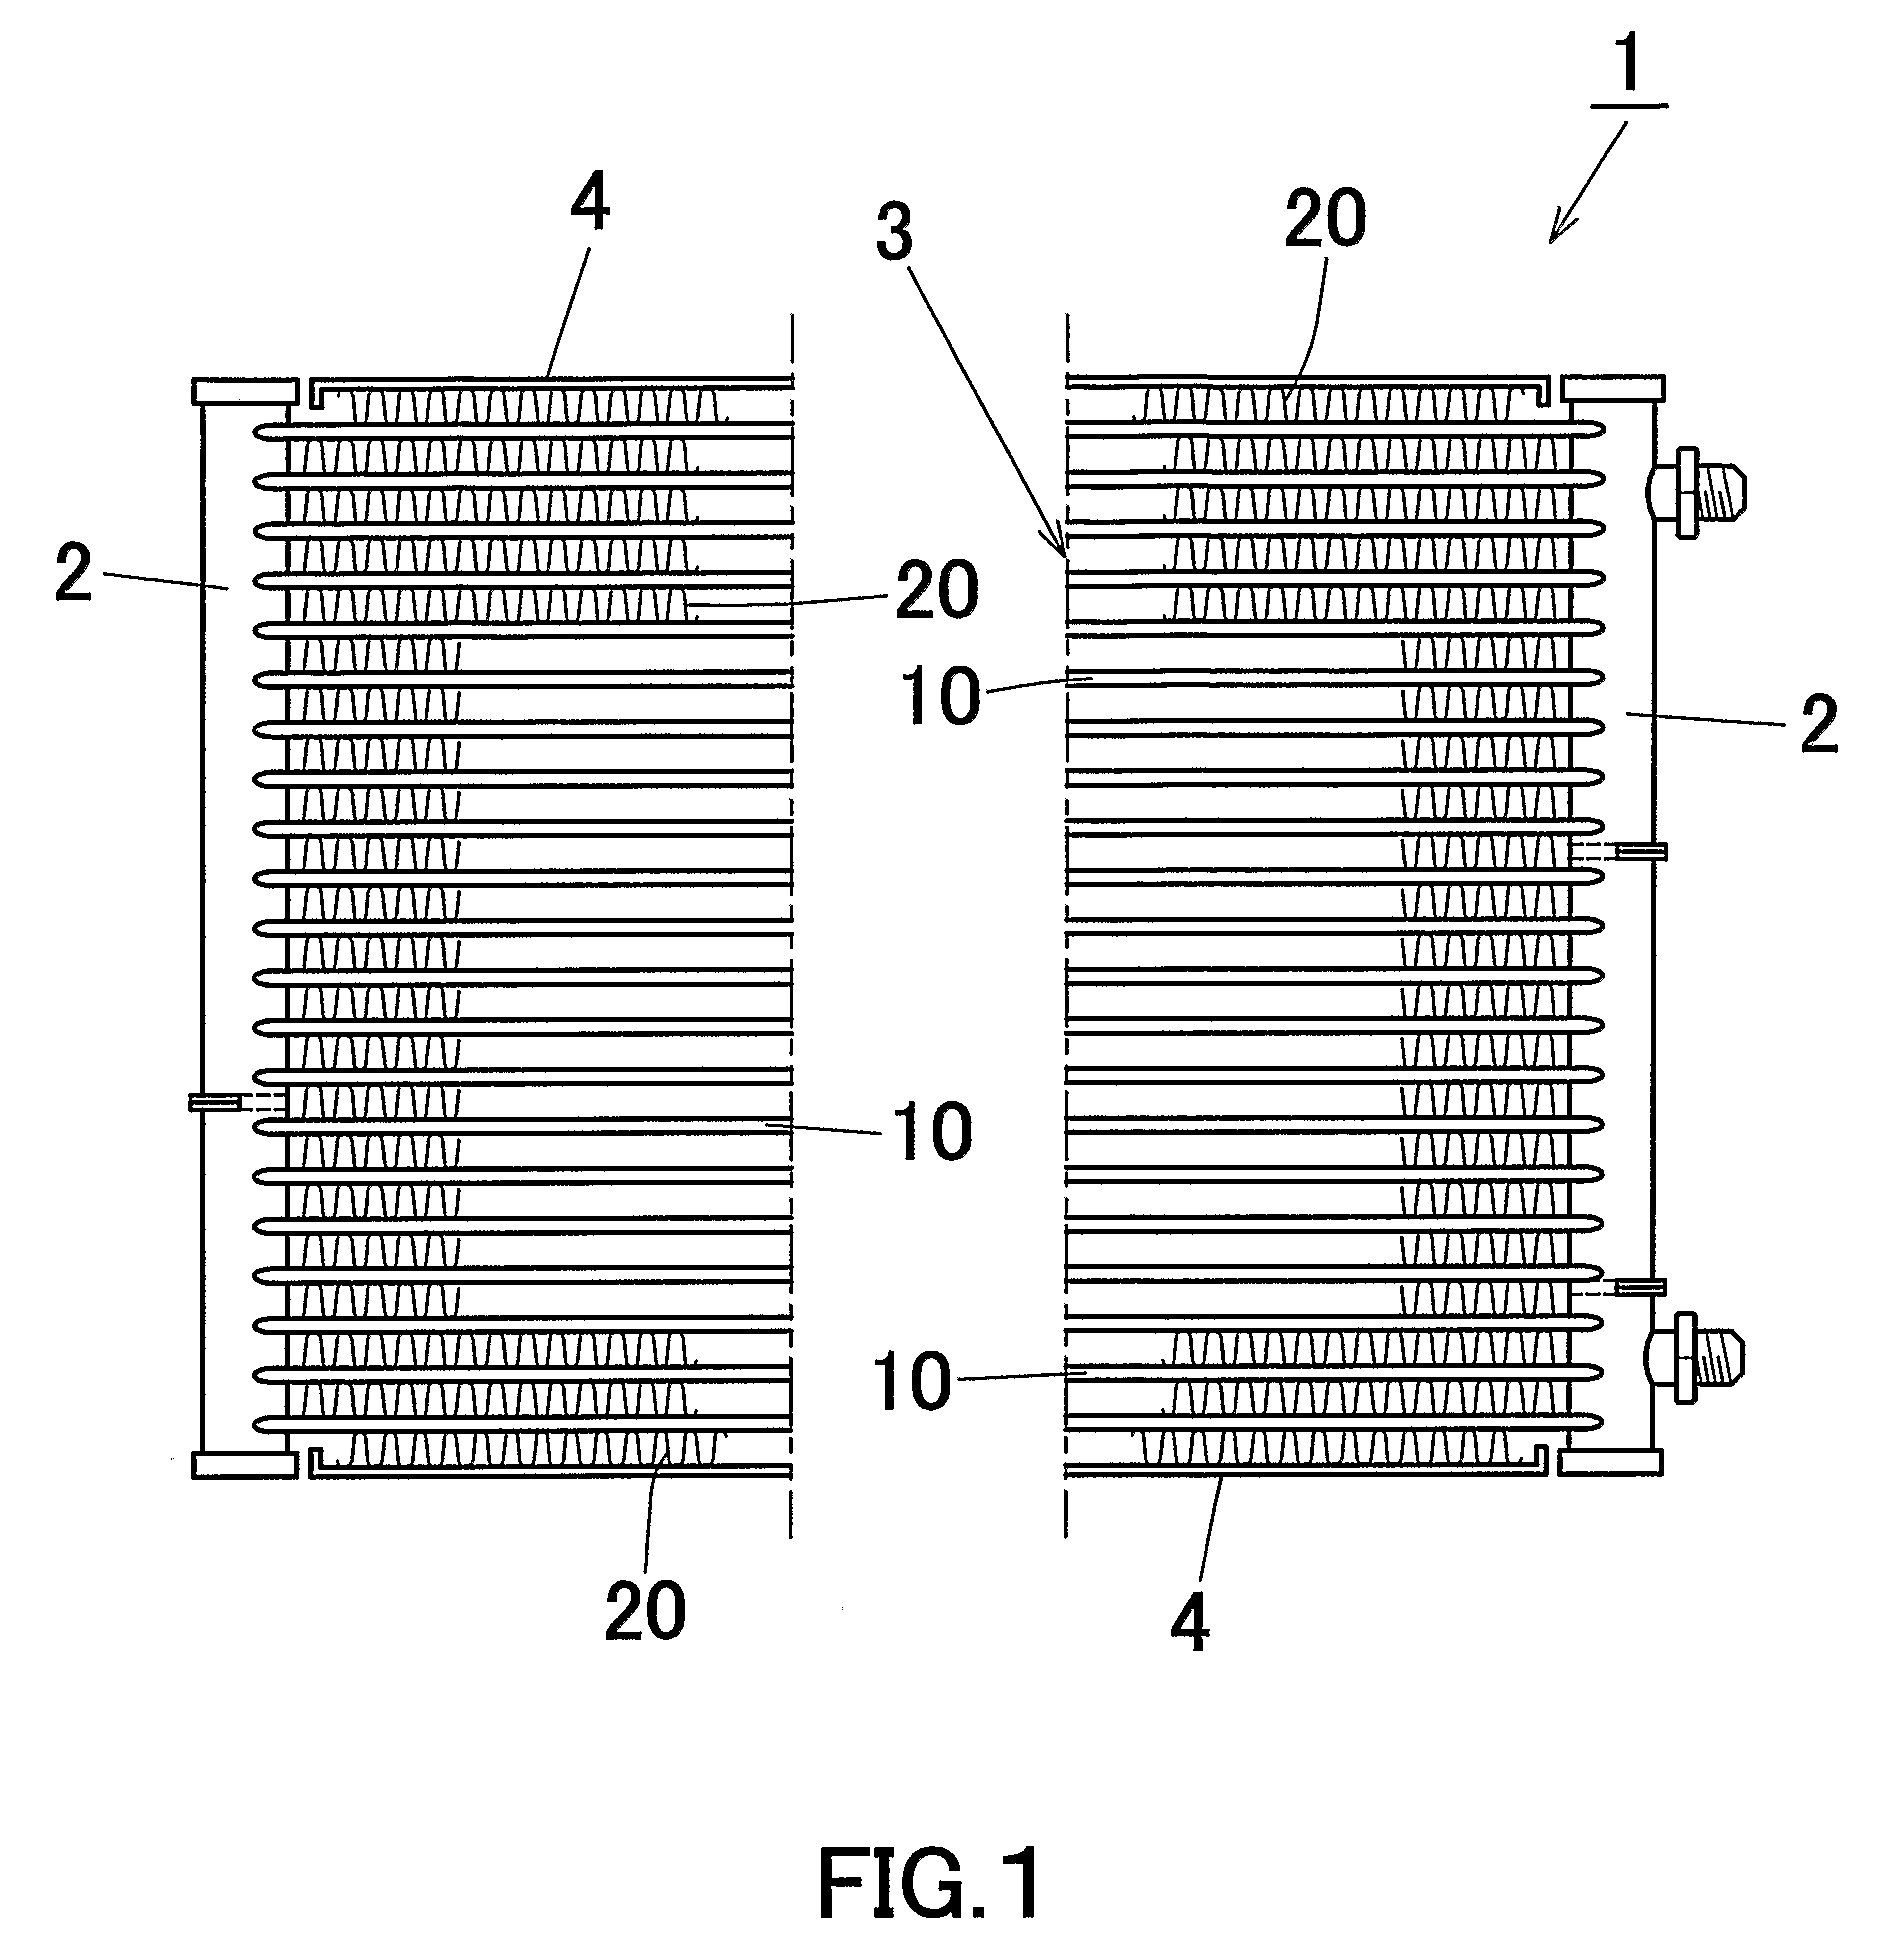 Heat Exchange and Method of Manufacturing the Same